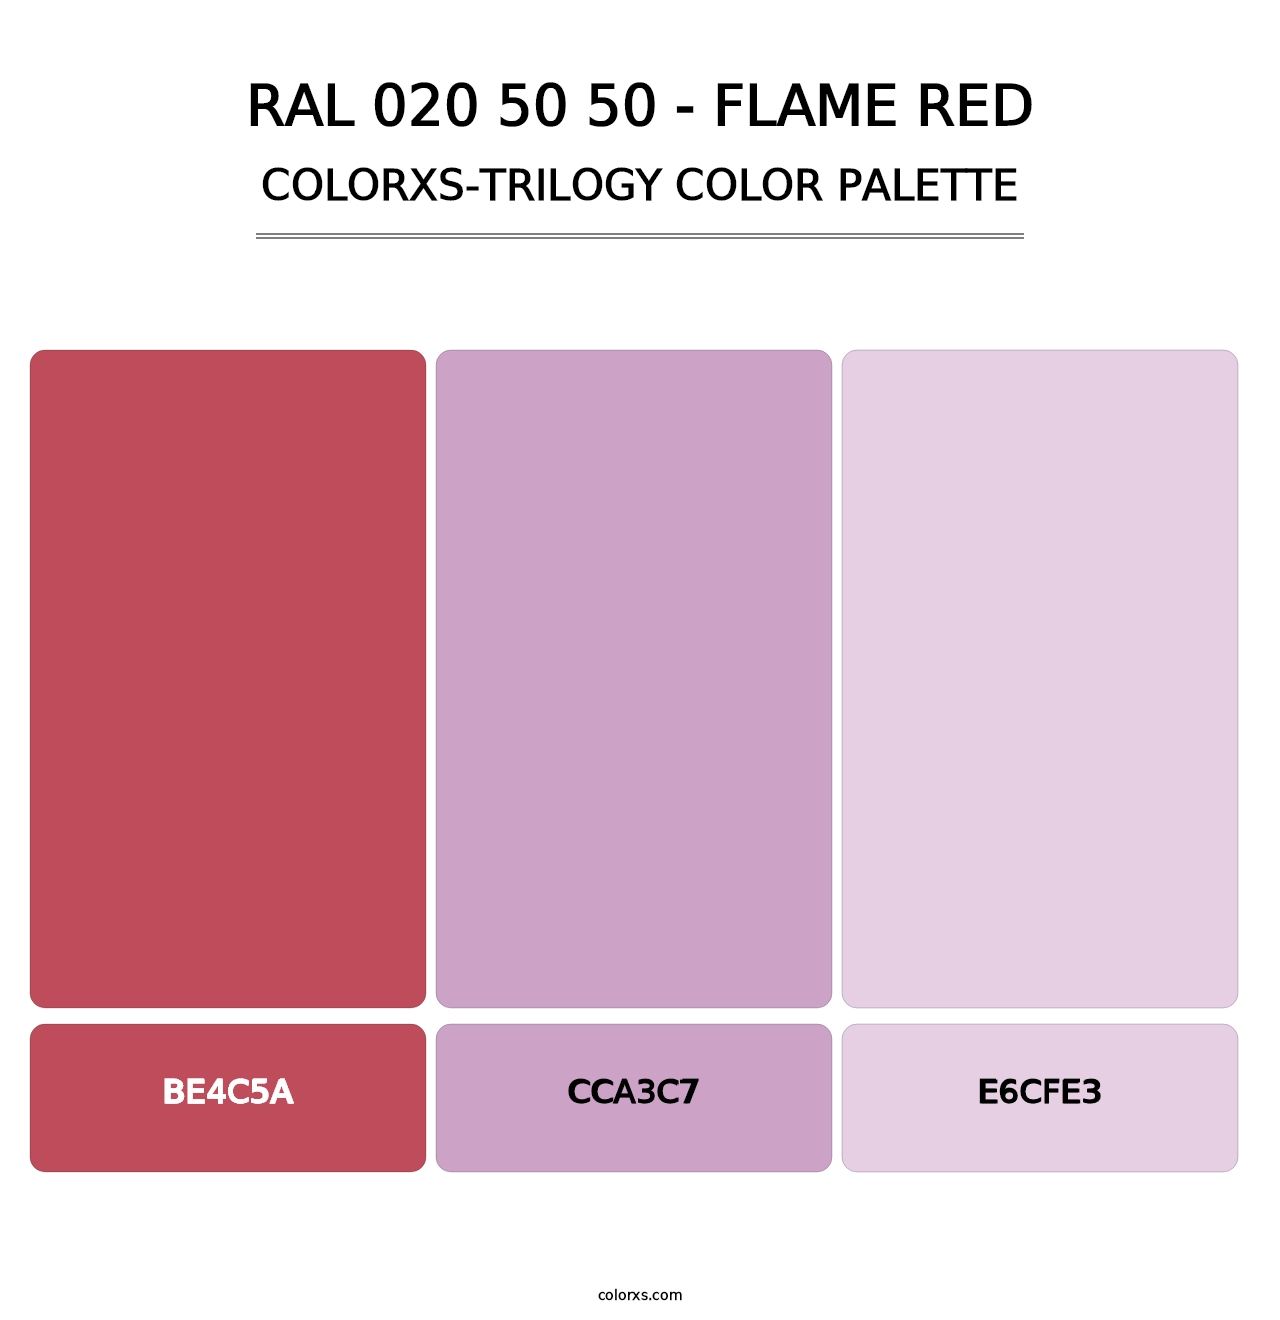 RAL 020 50 50 - Flame Red - Colorxs Trilogy Palette